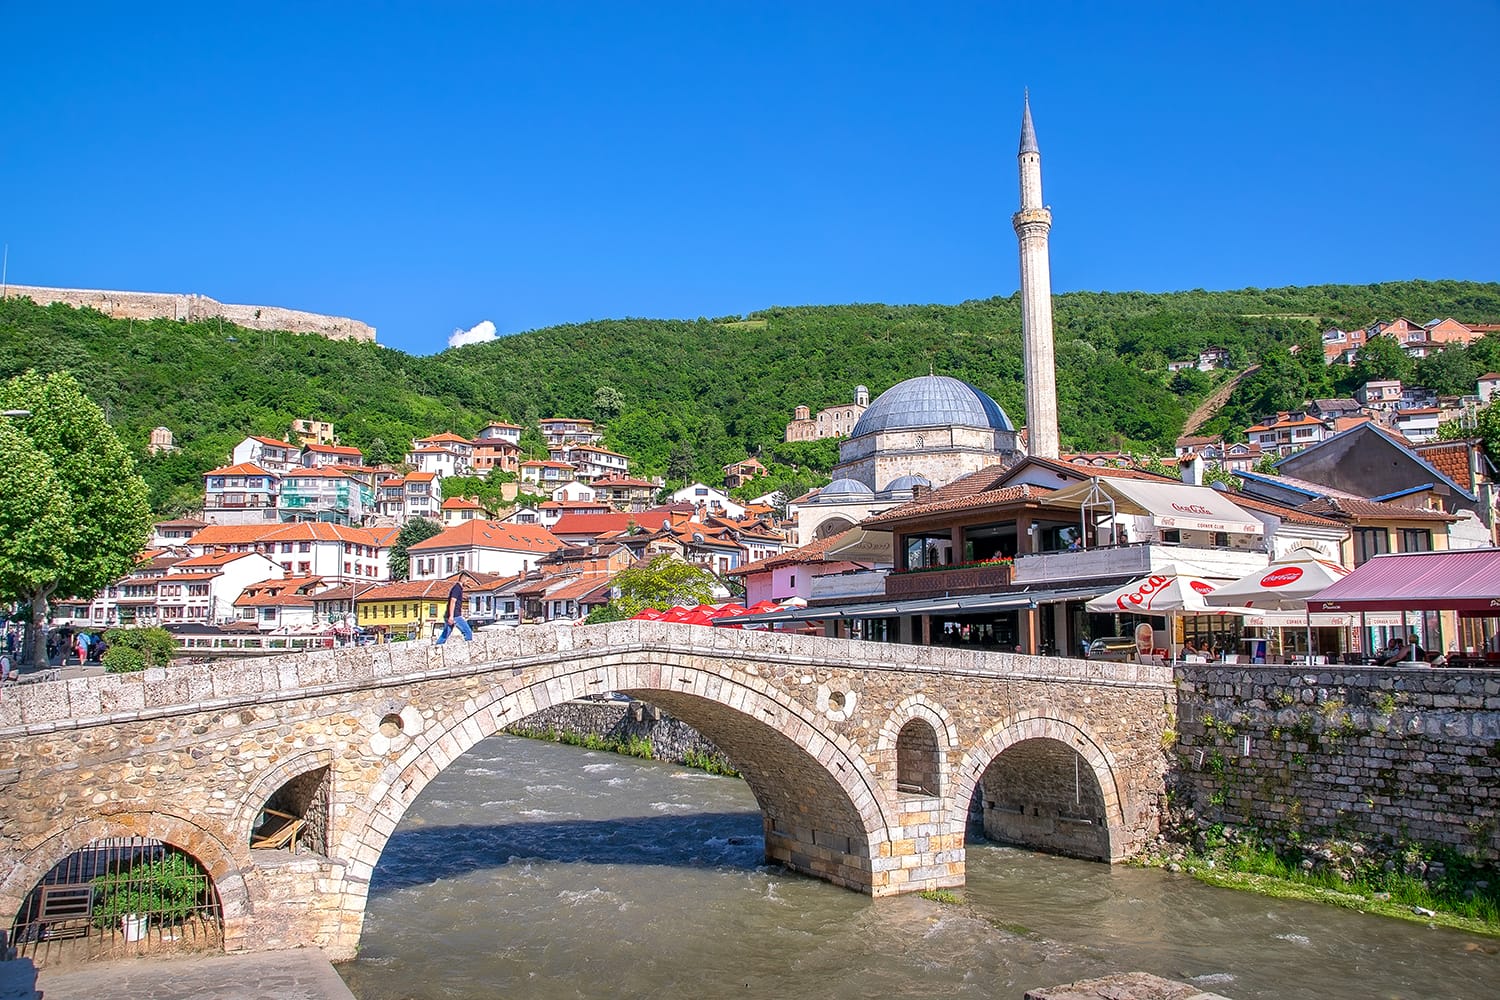 Prizren is a historic city located on the banks of the Prizren Bistrica river, and on the slopes of the Sar Mountains in the southern part of Kosovo.